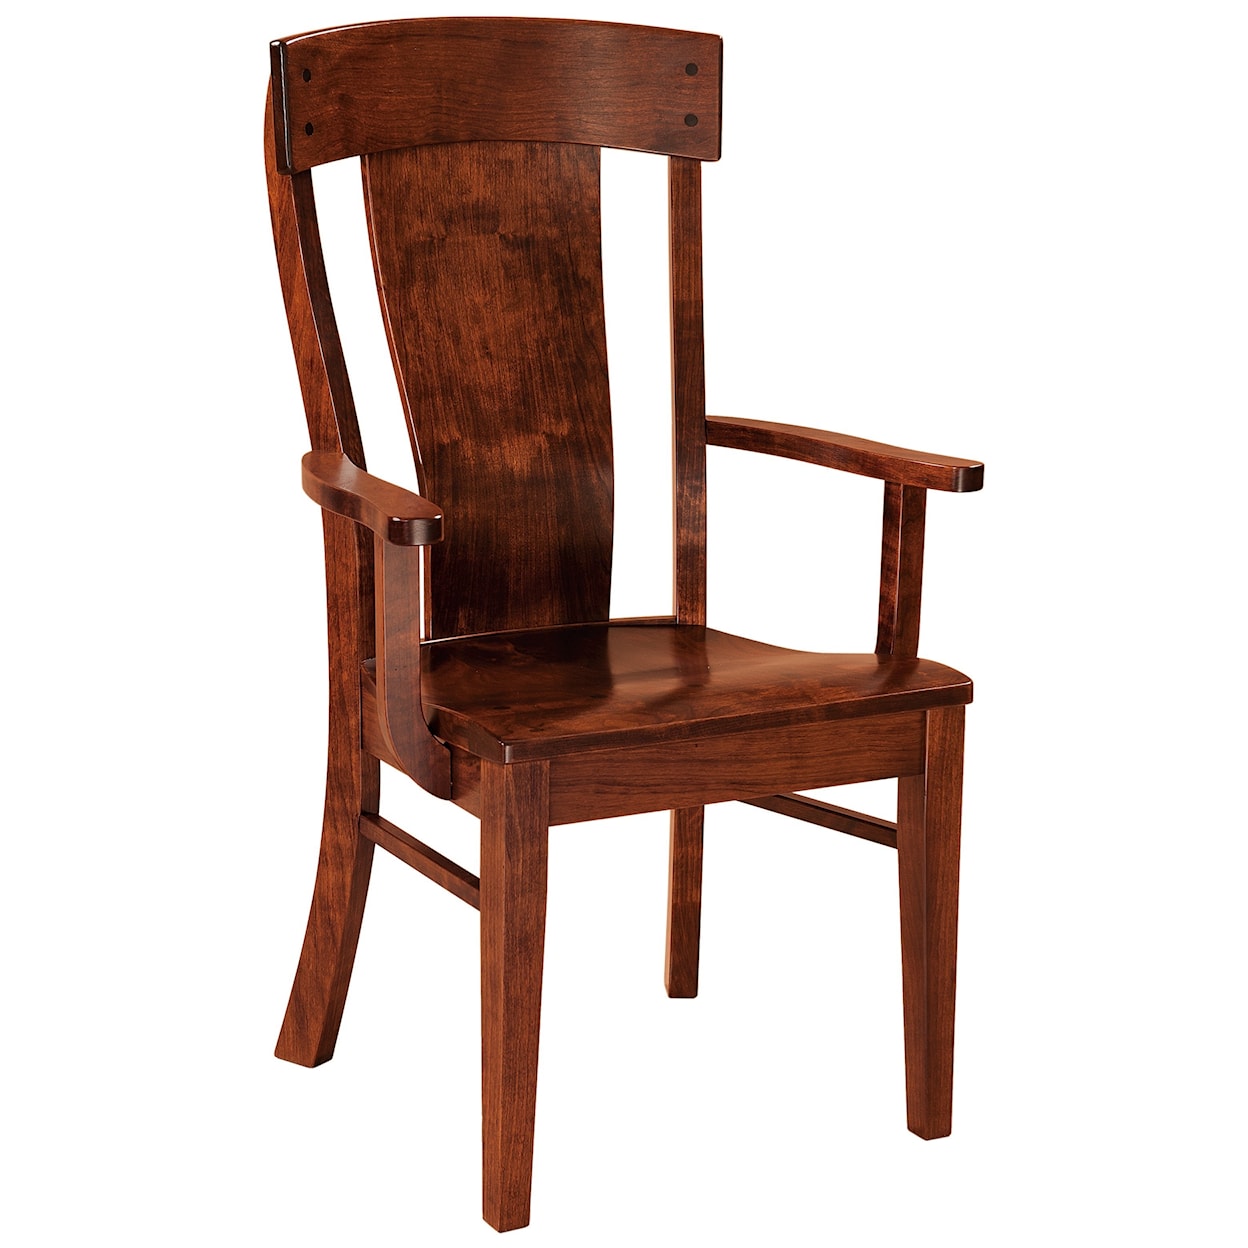 F&N Woodworking Lacombe Arm Chair - Wood Seat